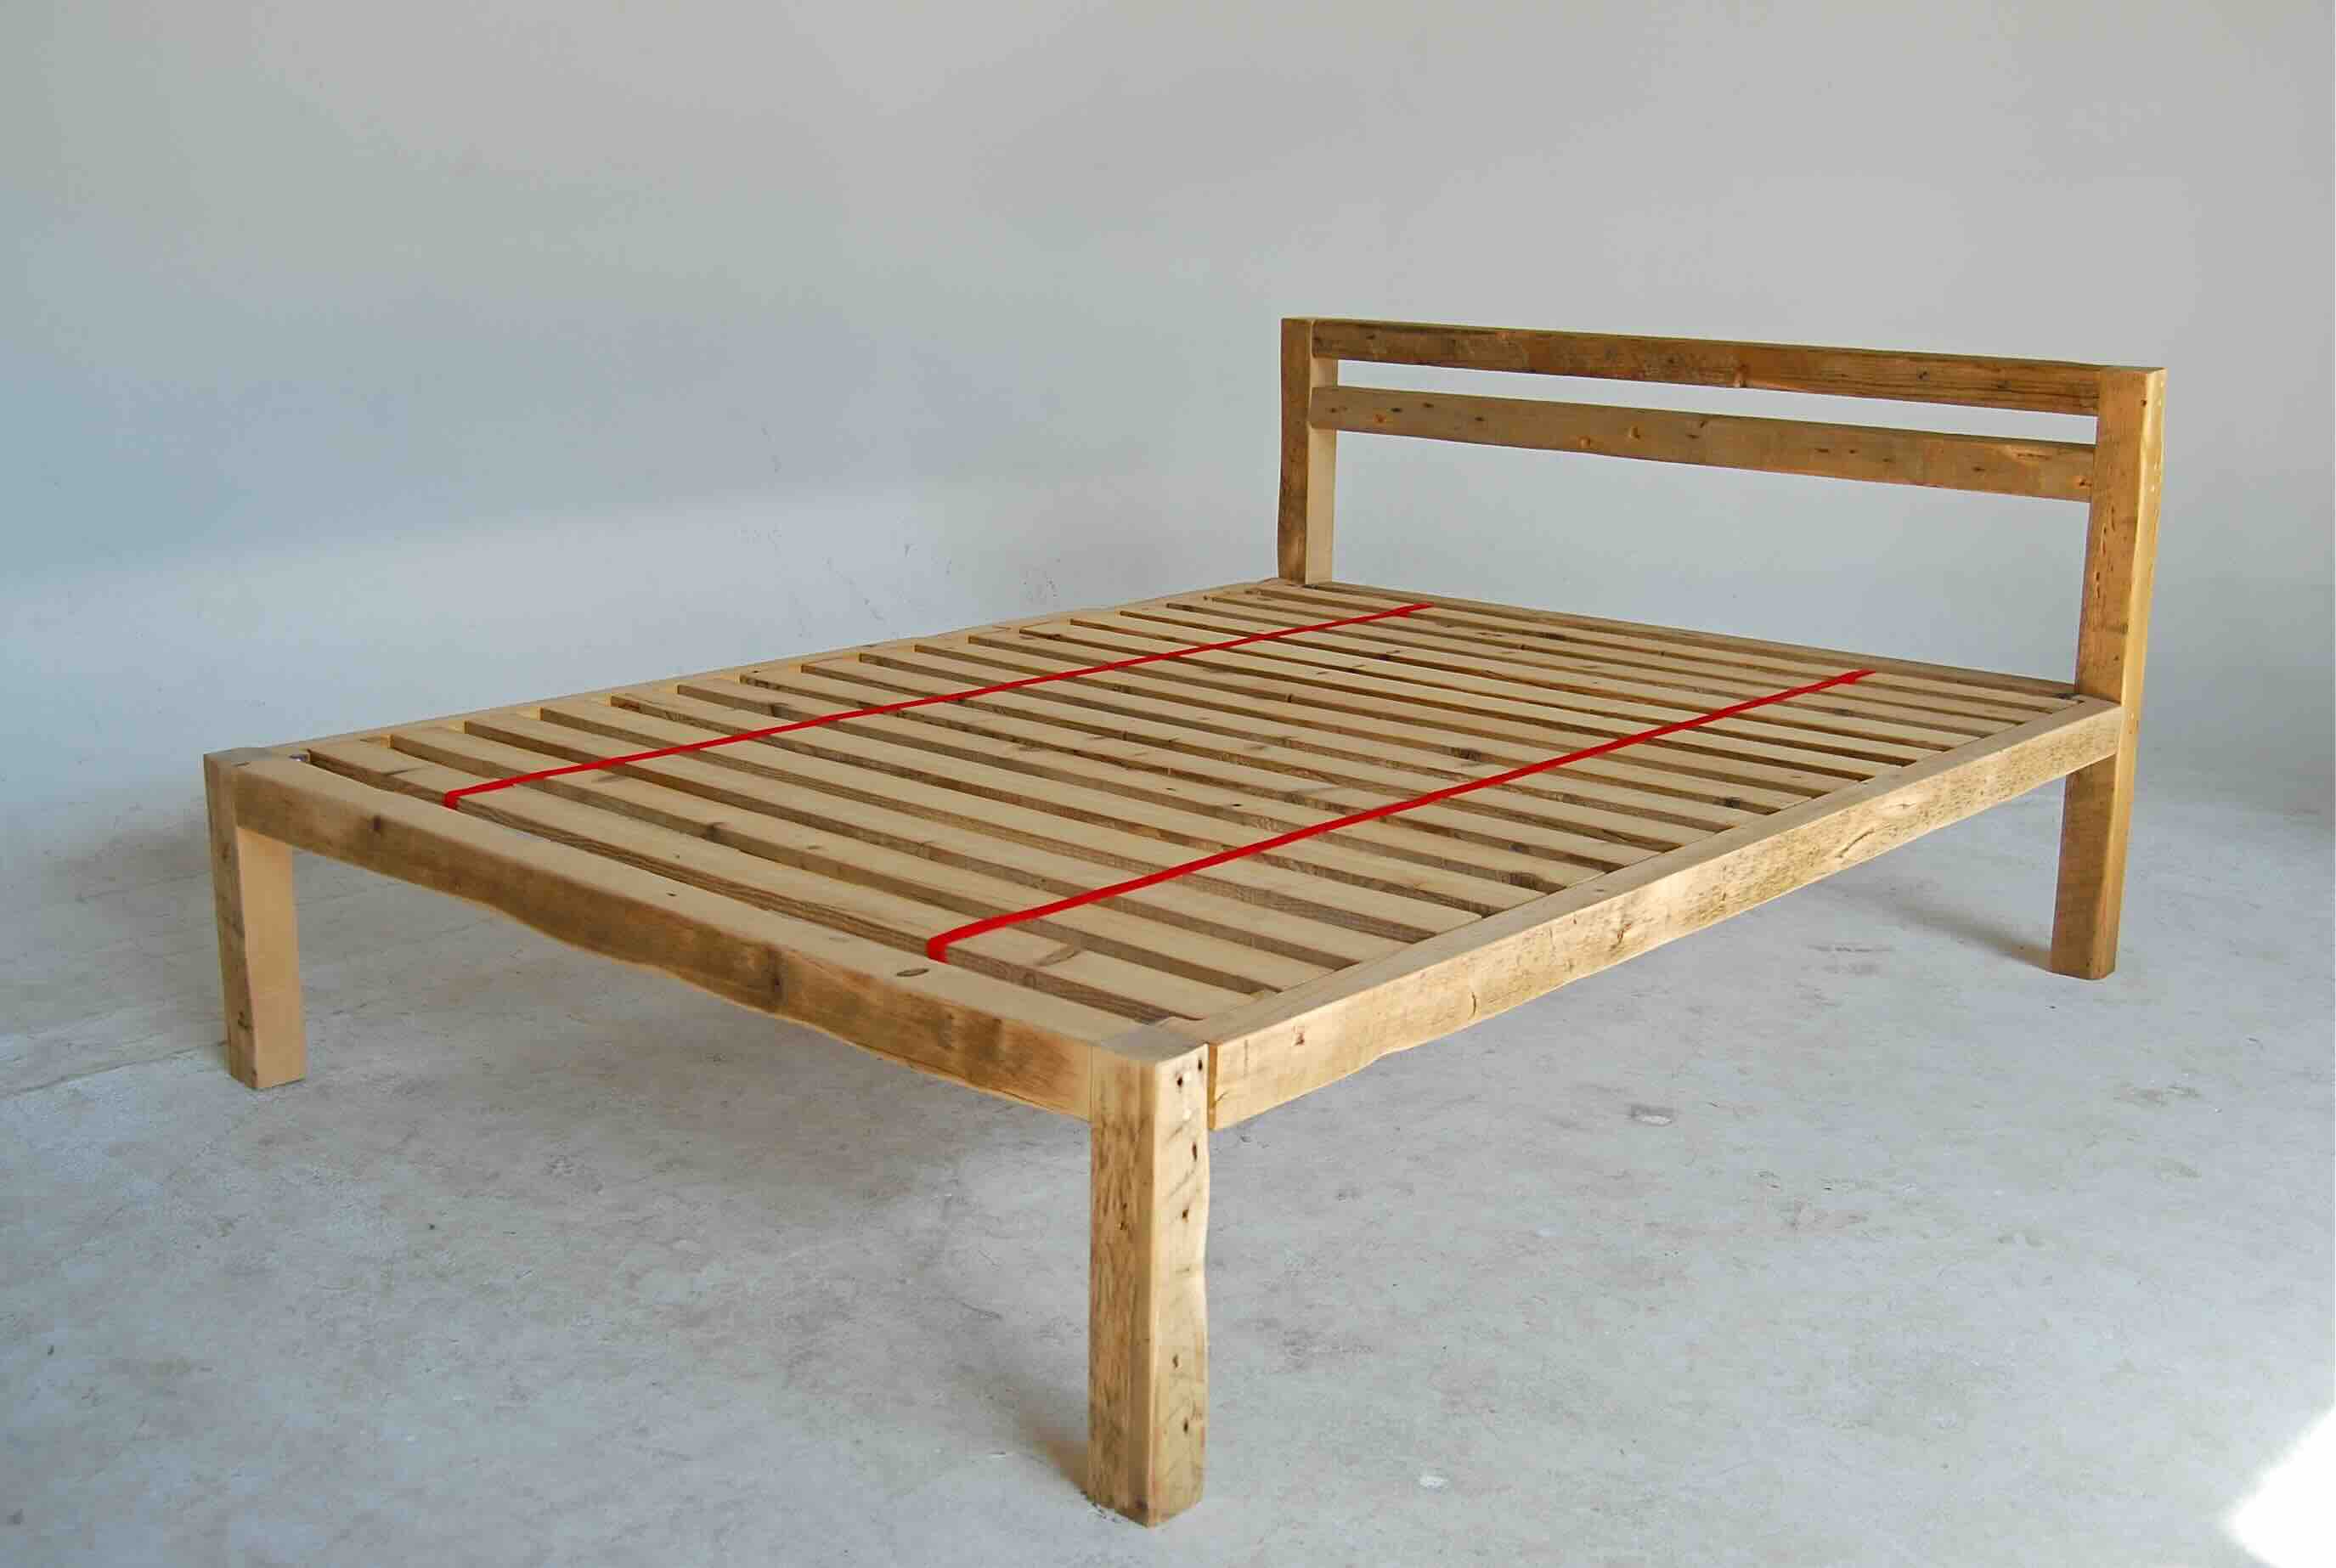 How To Build A Simple Bed Frame